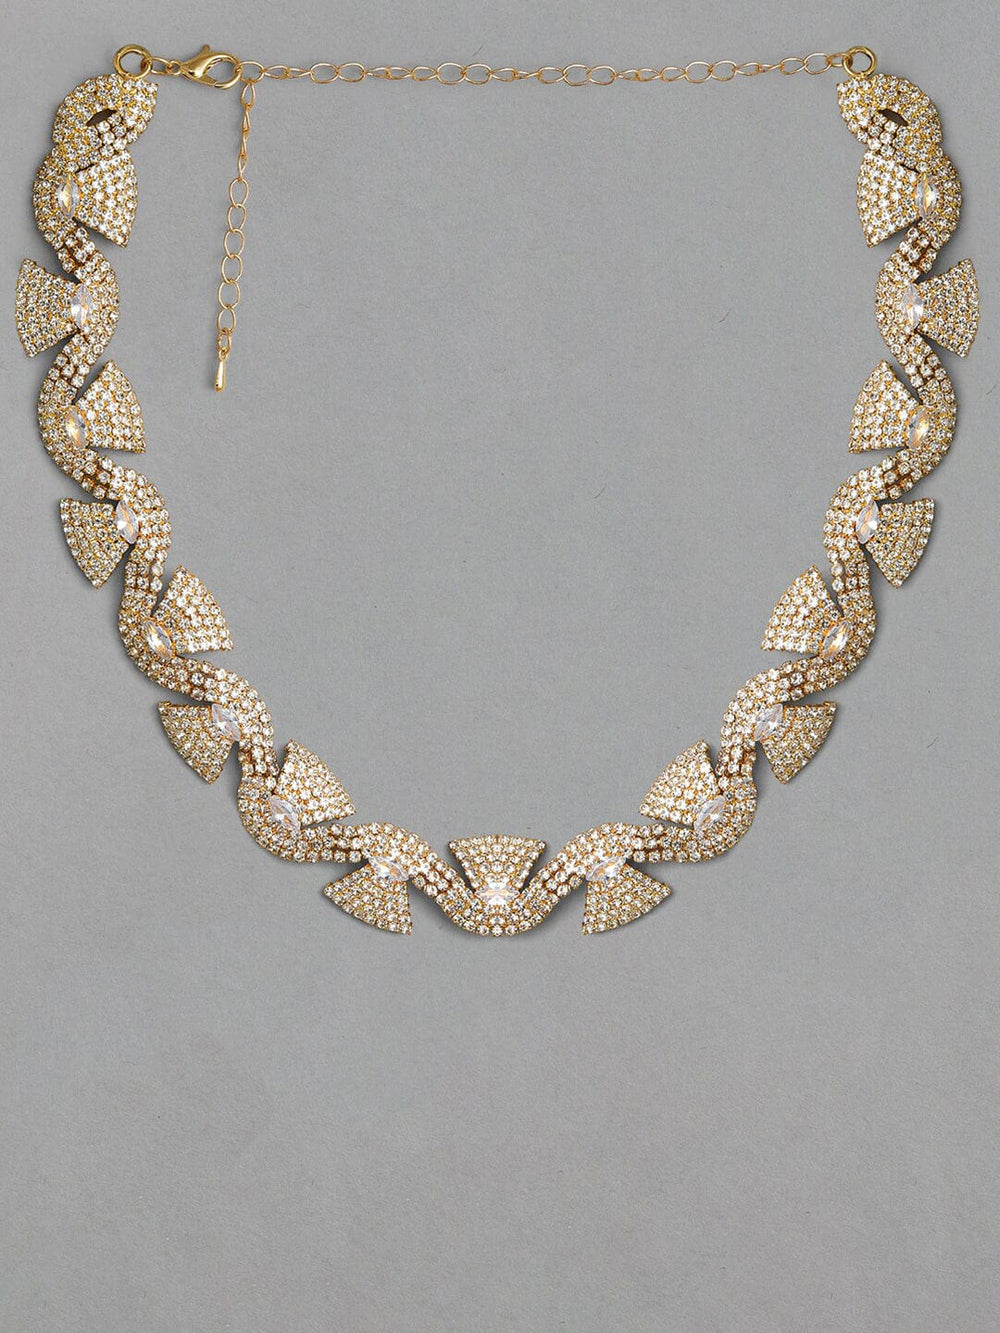 Rubans Gold-Toned & White Gold-Plated Handcrafted Necklace Chain & Necklaces